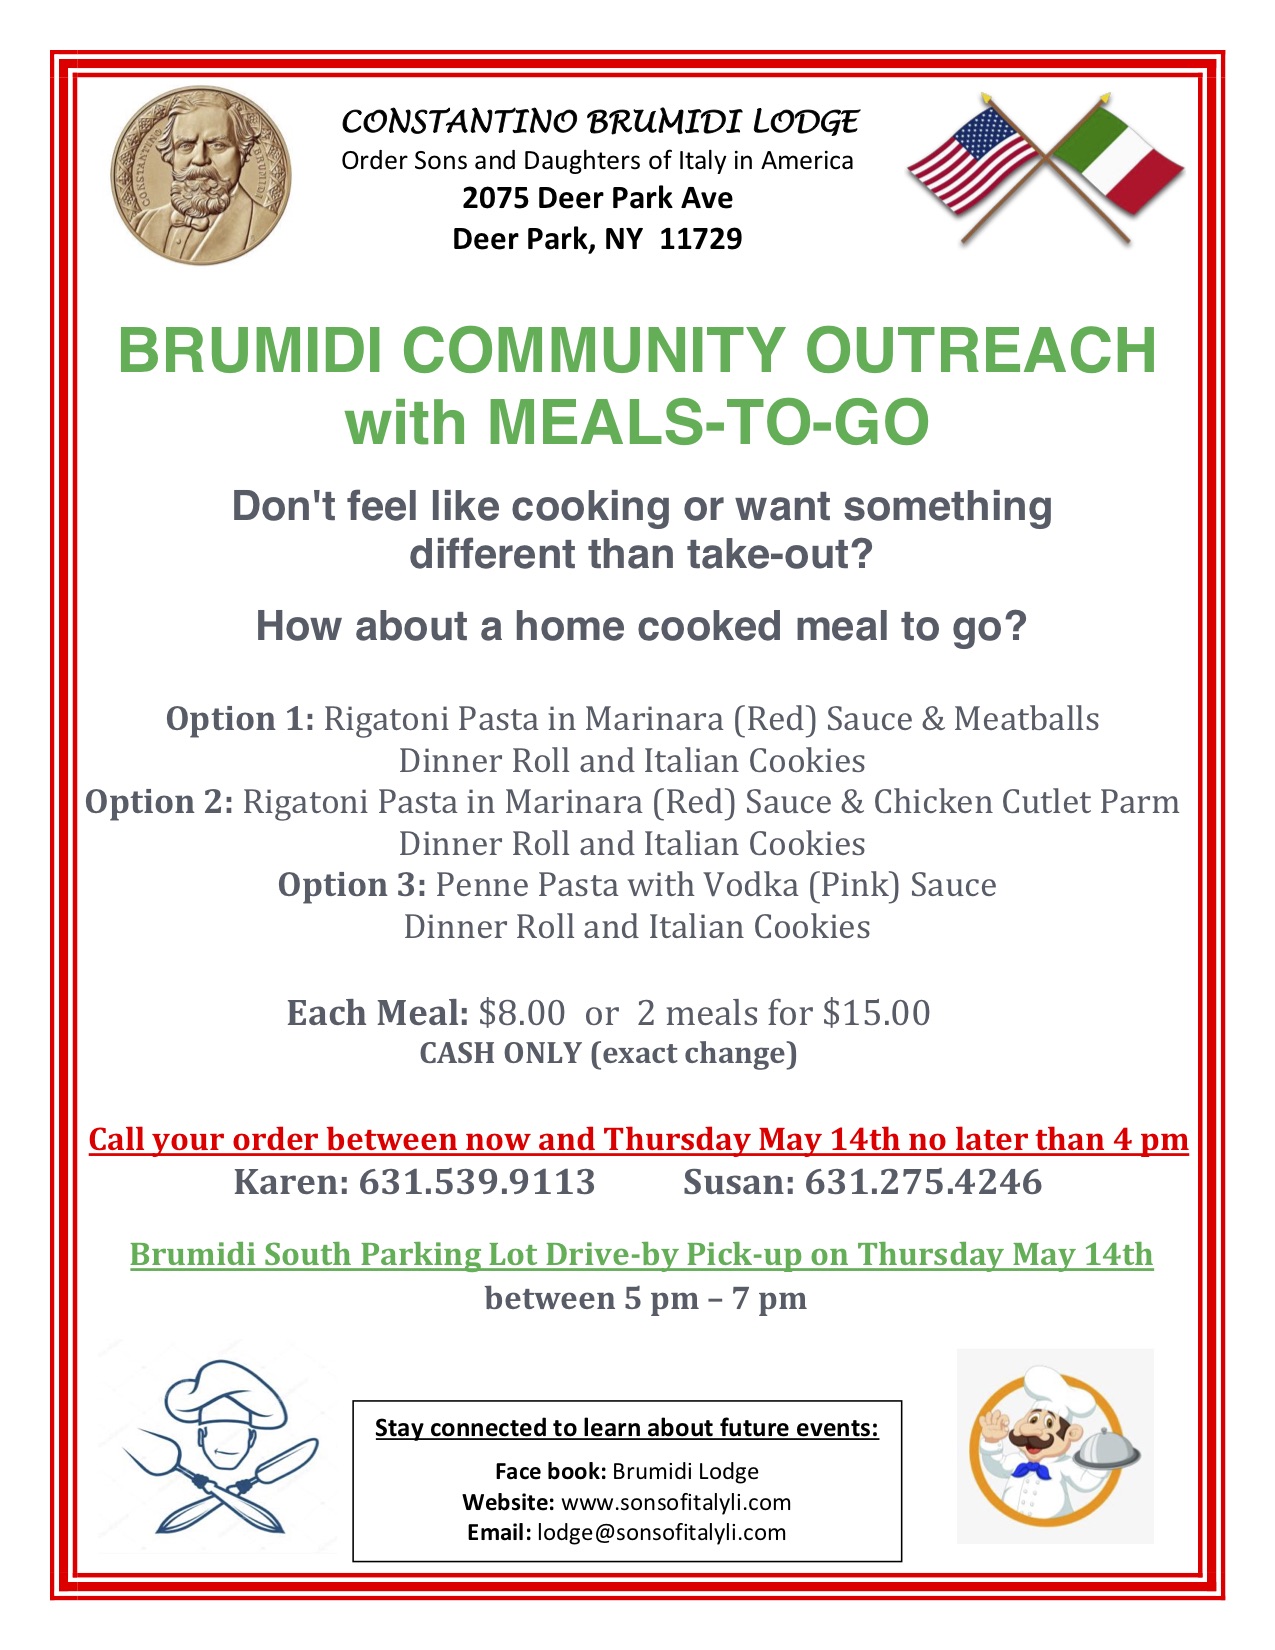 Brumidi Community Outreach With Meals-To-Go